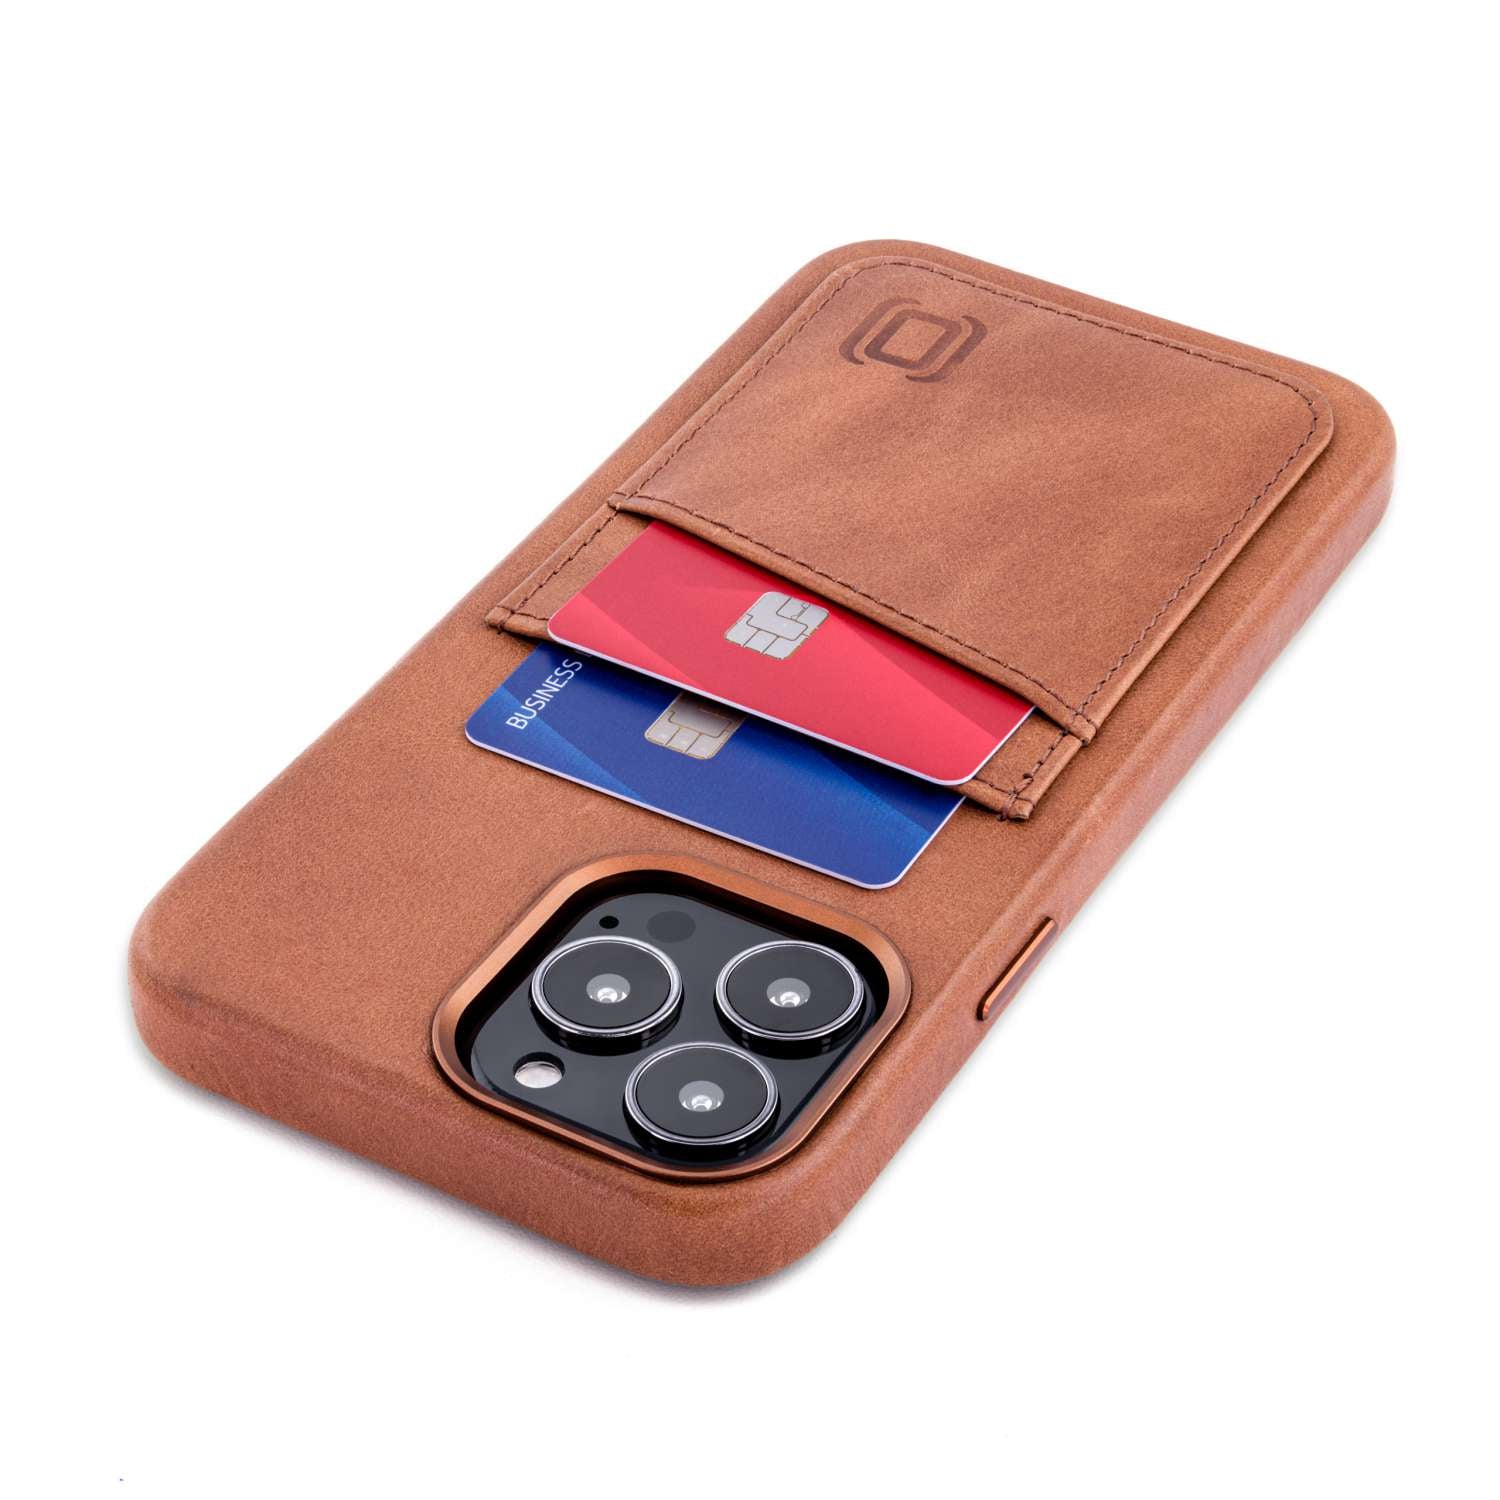 Leather iPhone 13 Pro Max Wallet Case [All iPhone Devices]